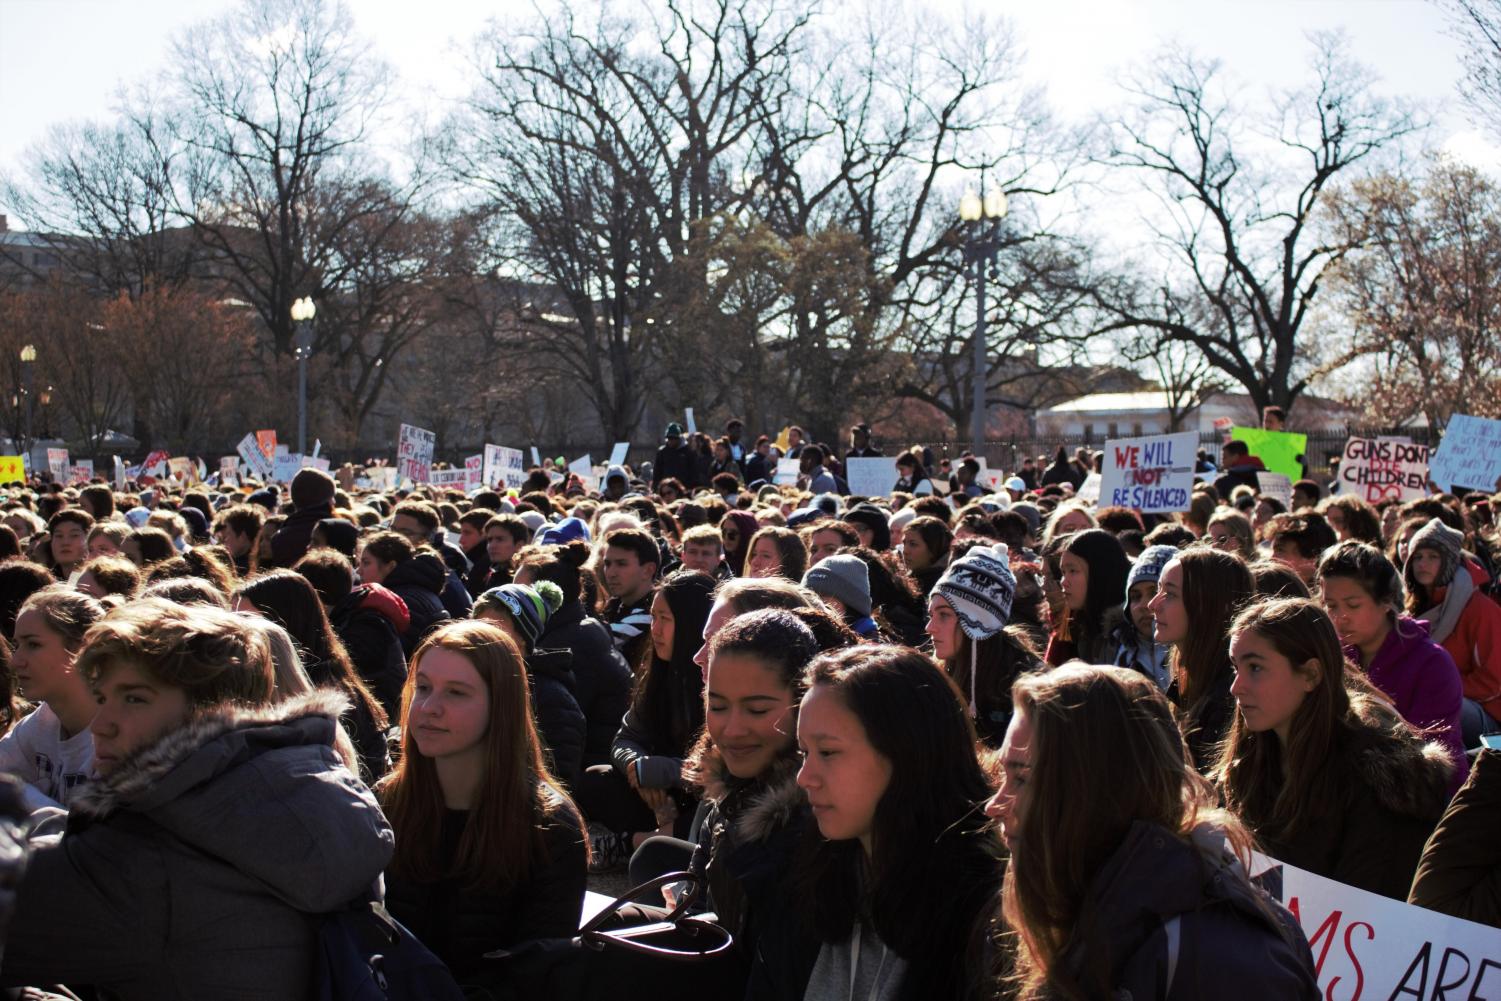 Students+demonstrate+in+national+walkout